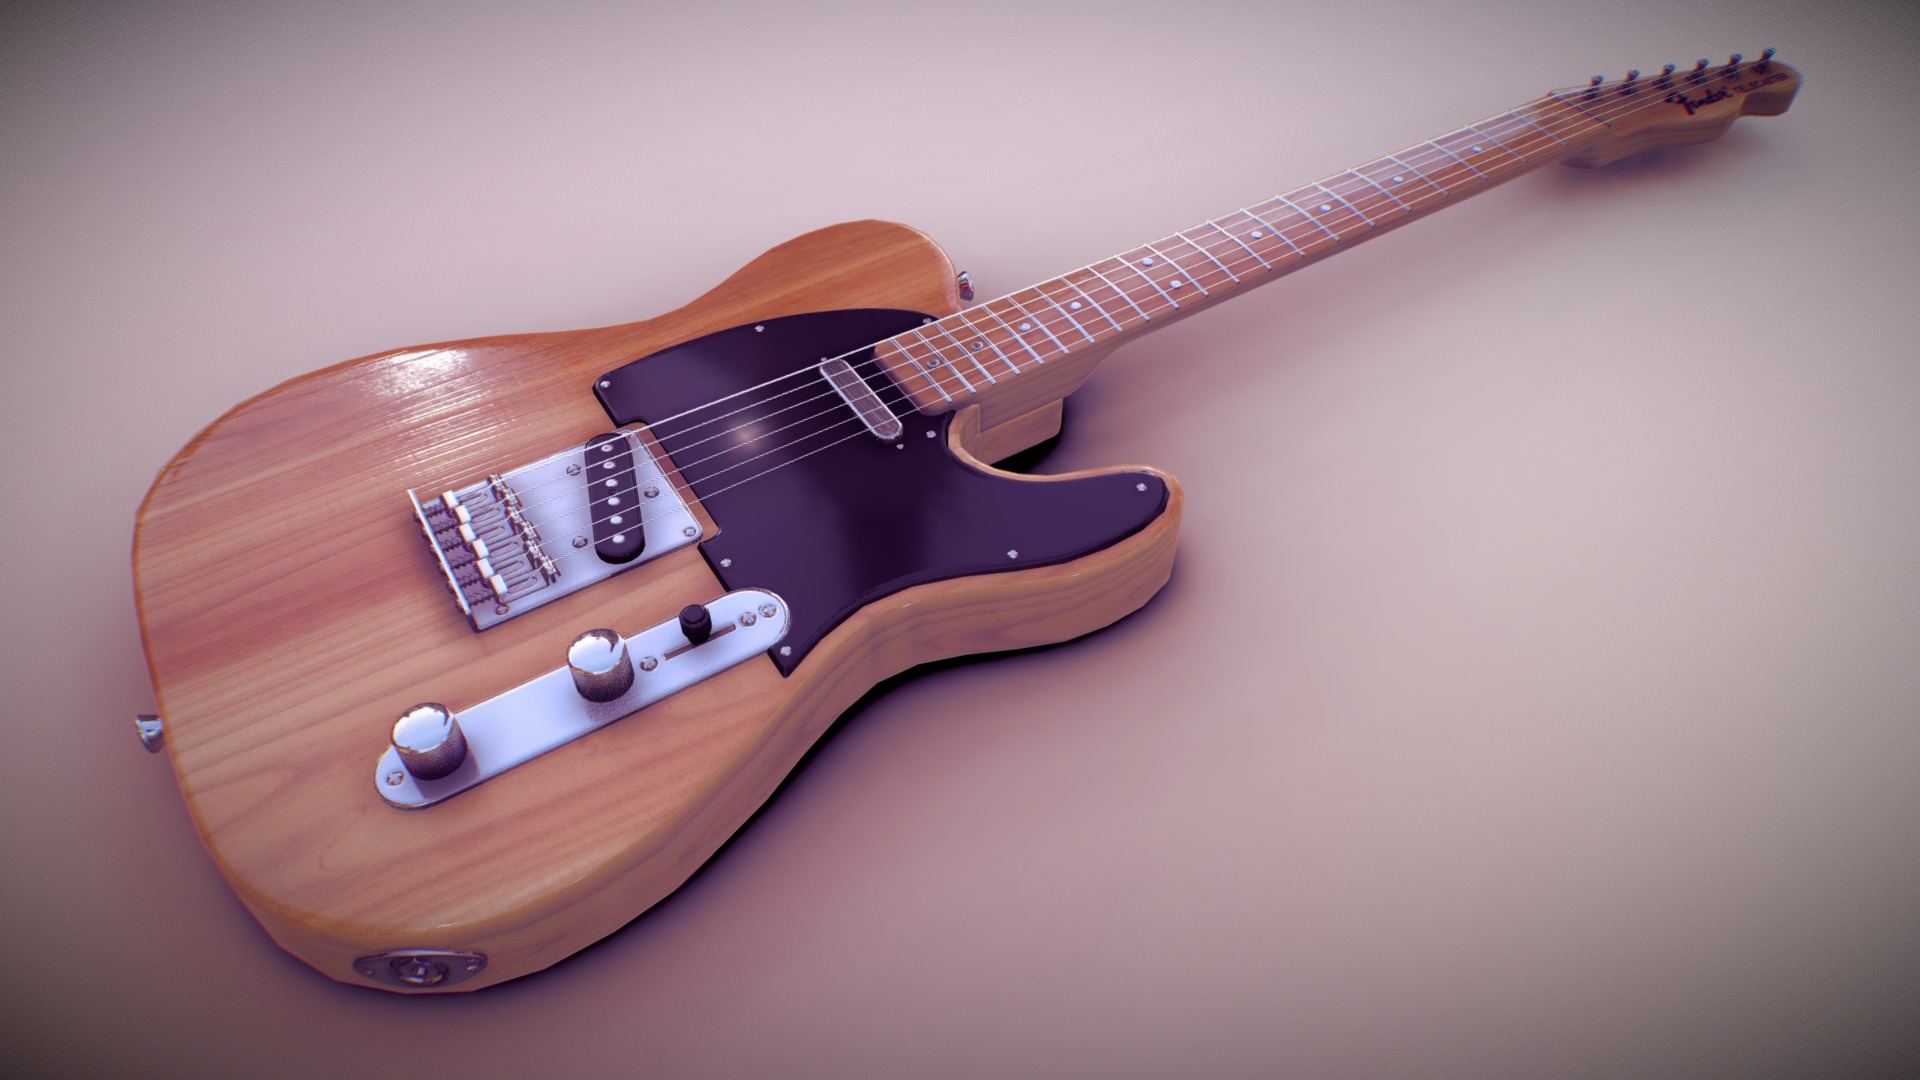 3D model Fender Telecaster - This is a 3D model of the Fender Telecaster. The 3D model is about a brown electric guitar.